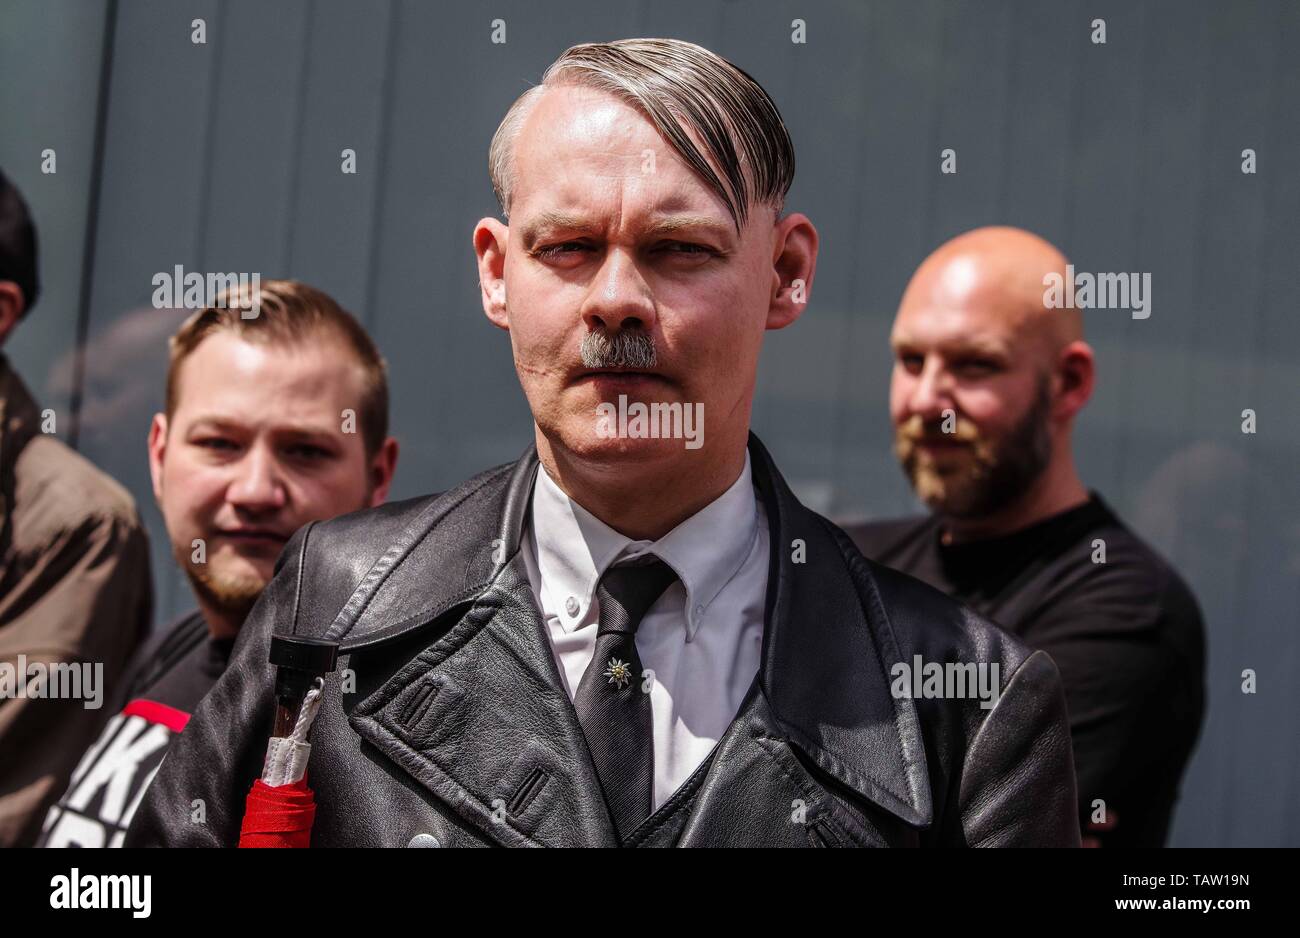 Dortmund, Nordrhein Westfalen, Germany. 25th May, 2019. A neonazi from The Netherlands has fashioned himself into the appearance of Adolph Hitler. On his tie is a pin of the Edelweiss flower, which was used by the SS and is still in use by the Gebirgsjaeger today. Prior to the European Elections, the neonazi party Die Rechte (The Right) organized a rally in the German city of Dortmund to promote their candidate, the incarcerated Holocaust denier Ursula Haverbeck. The demonstration and march were organized by prominent local political figure and neonazi activist Michael Brueck (Michael BrÃ¼ck Stock Photo